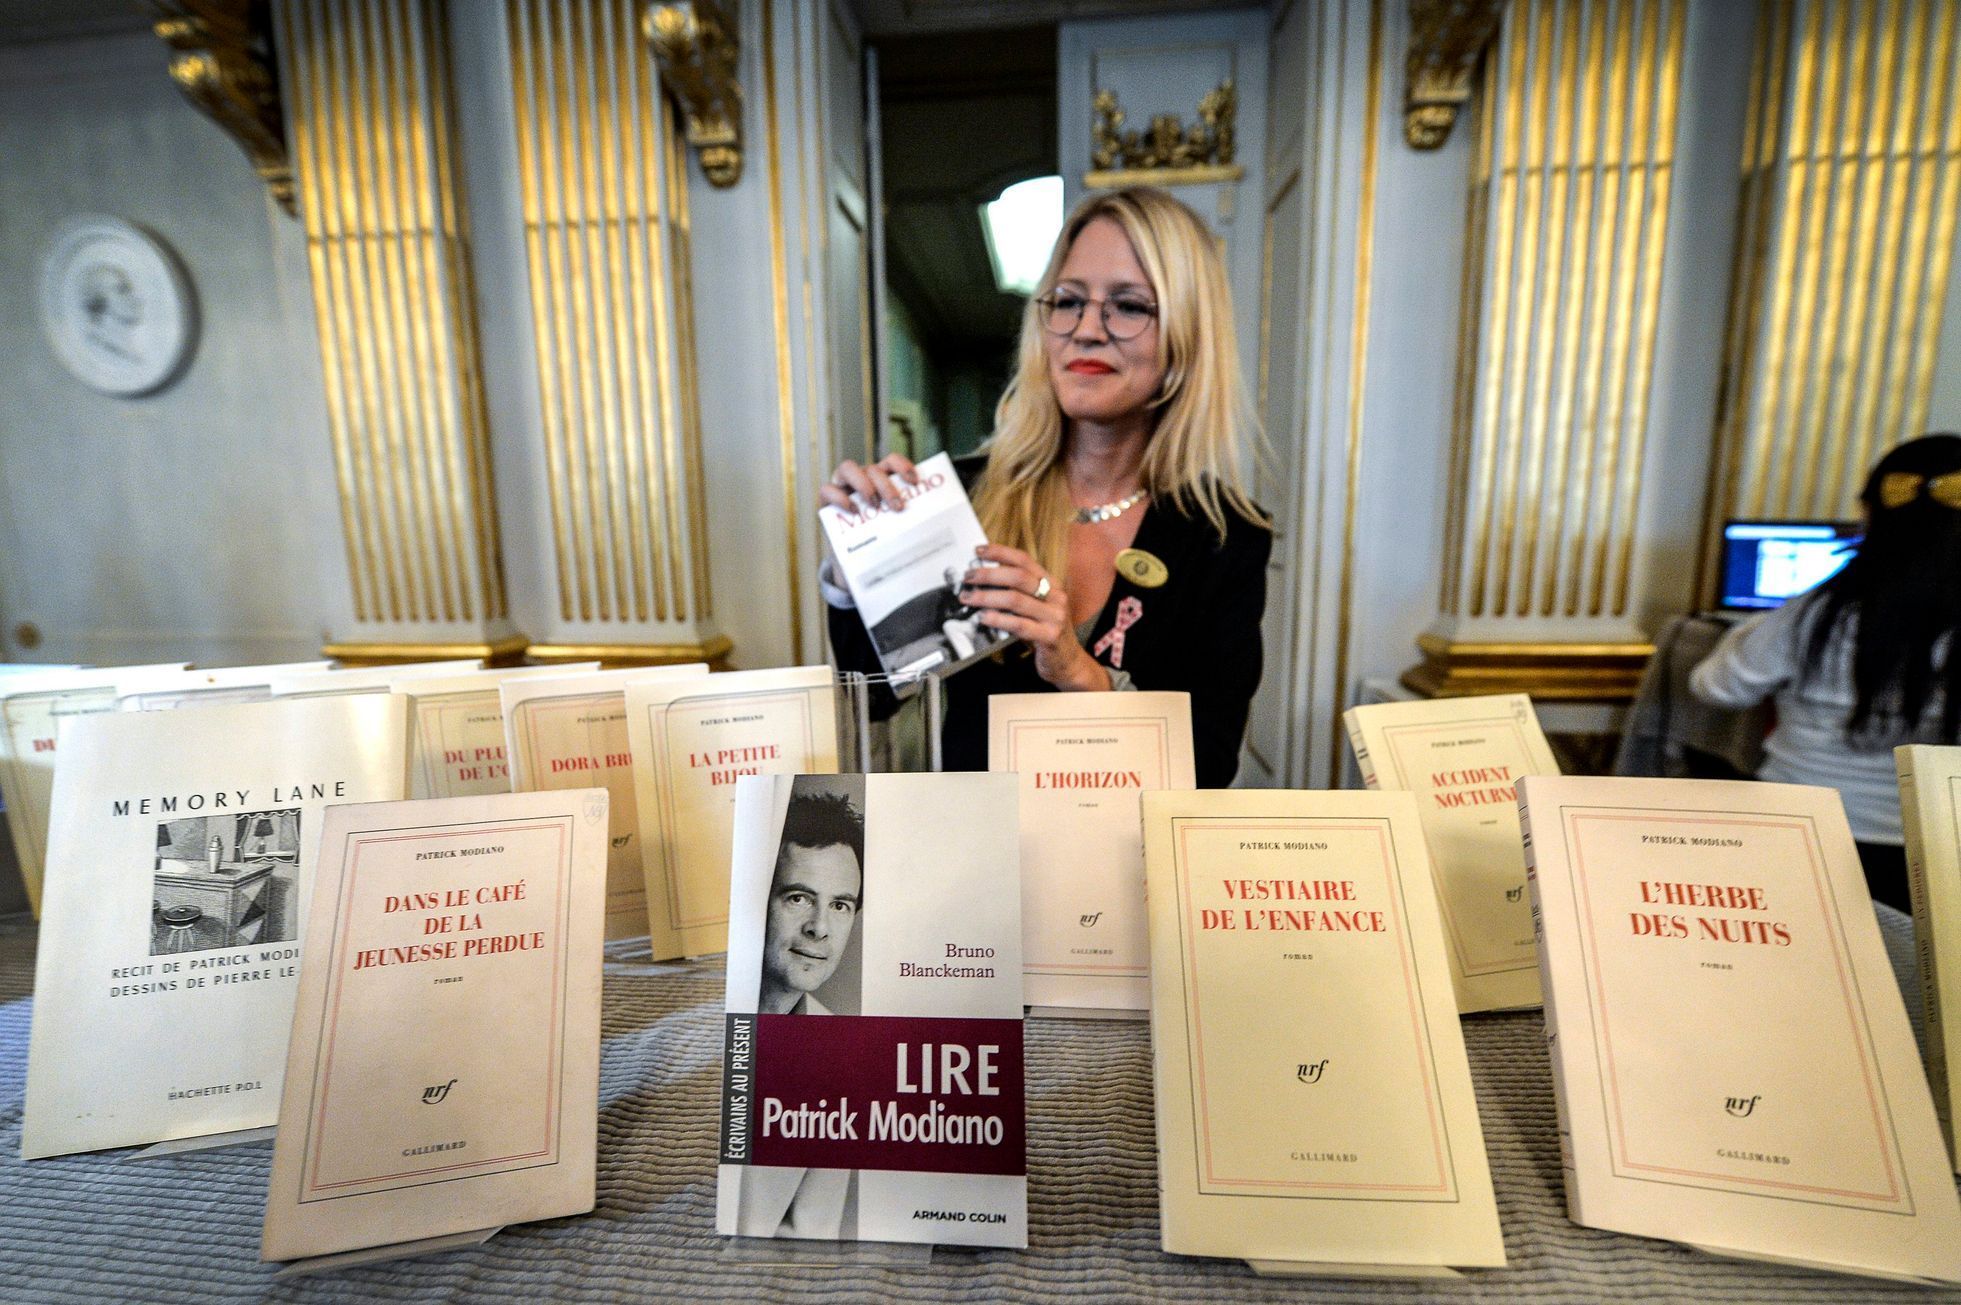 Books by French writer Patrick Modiano are displayed at the Royal Swedish Academy after he was declared the winner of the 2014 Nobel Prize for Literature in Stockholm